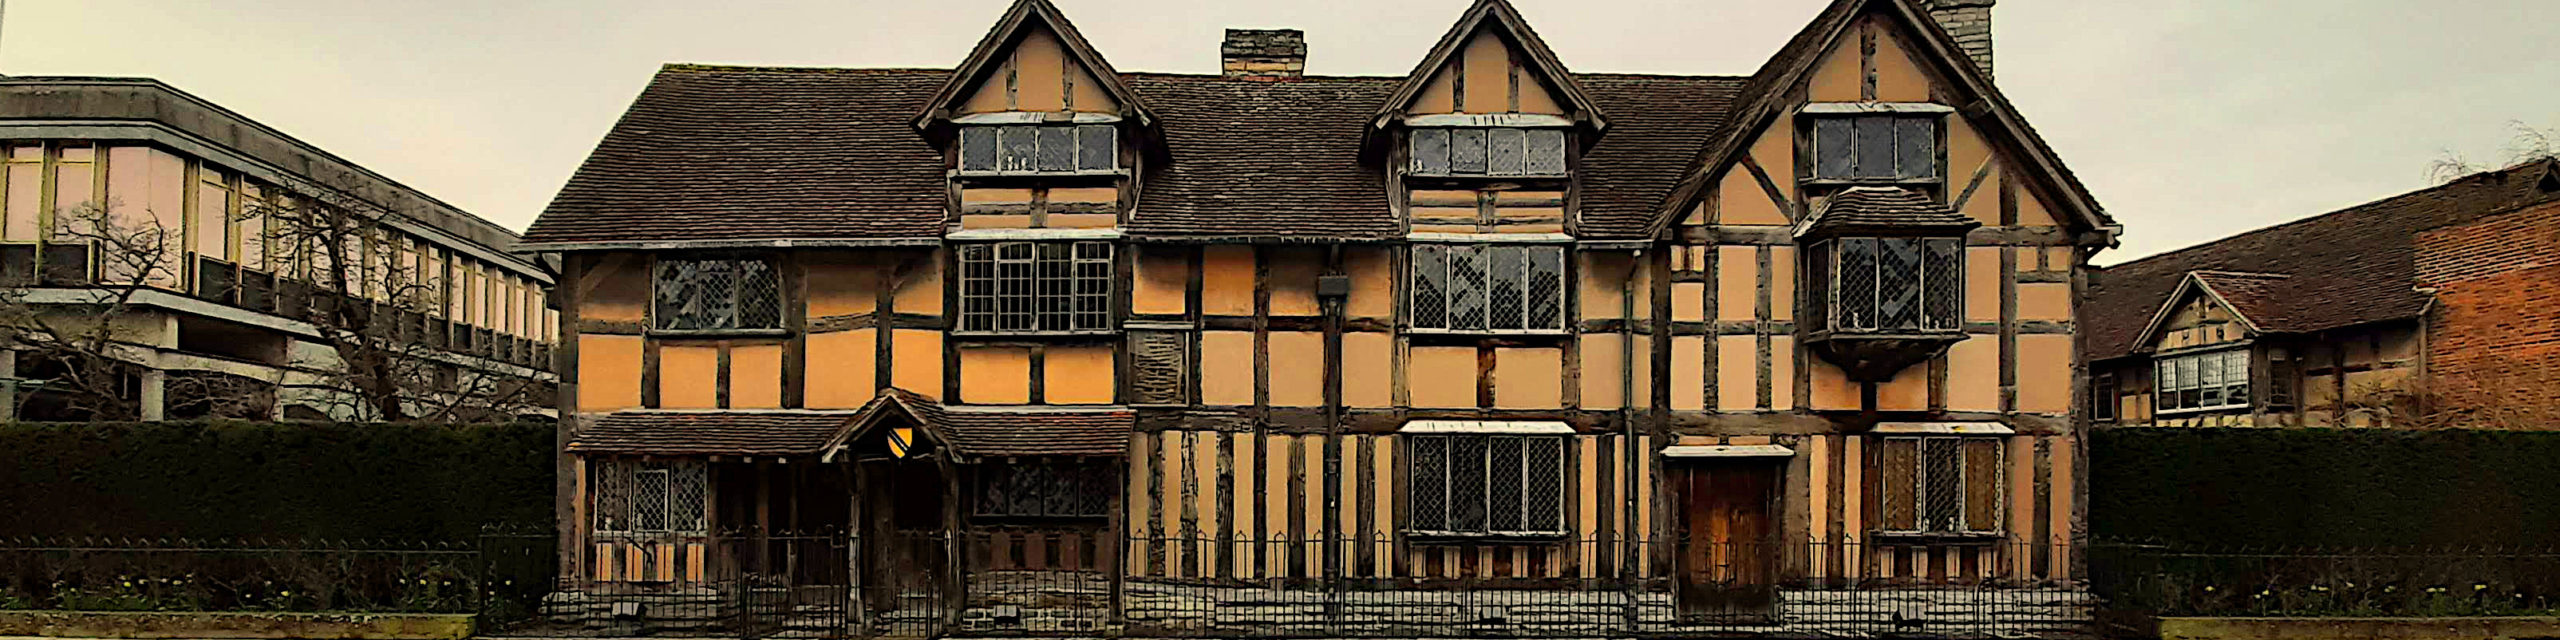 Shakespeare's birthplace - see this and the Cotswolds